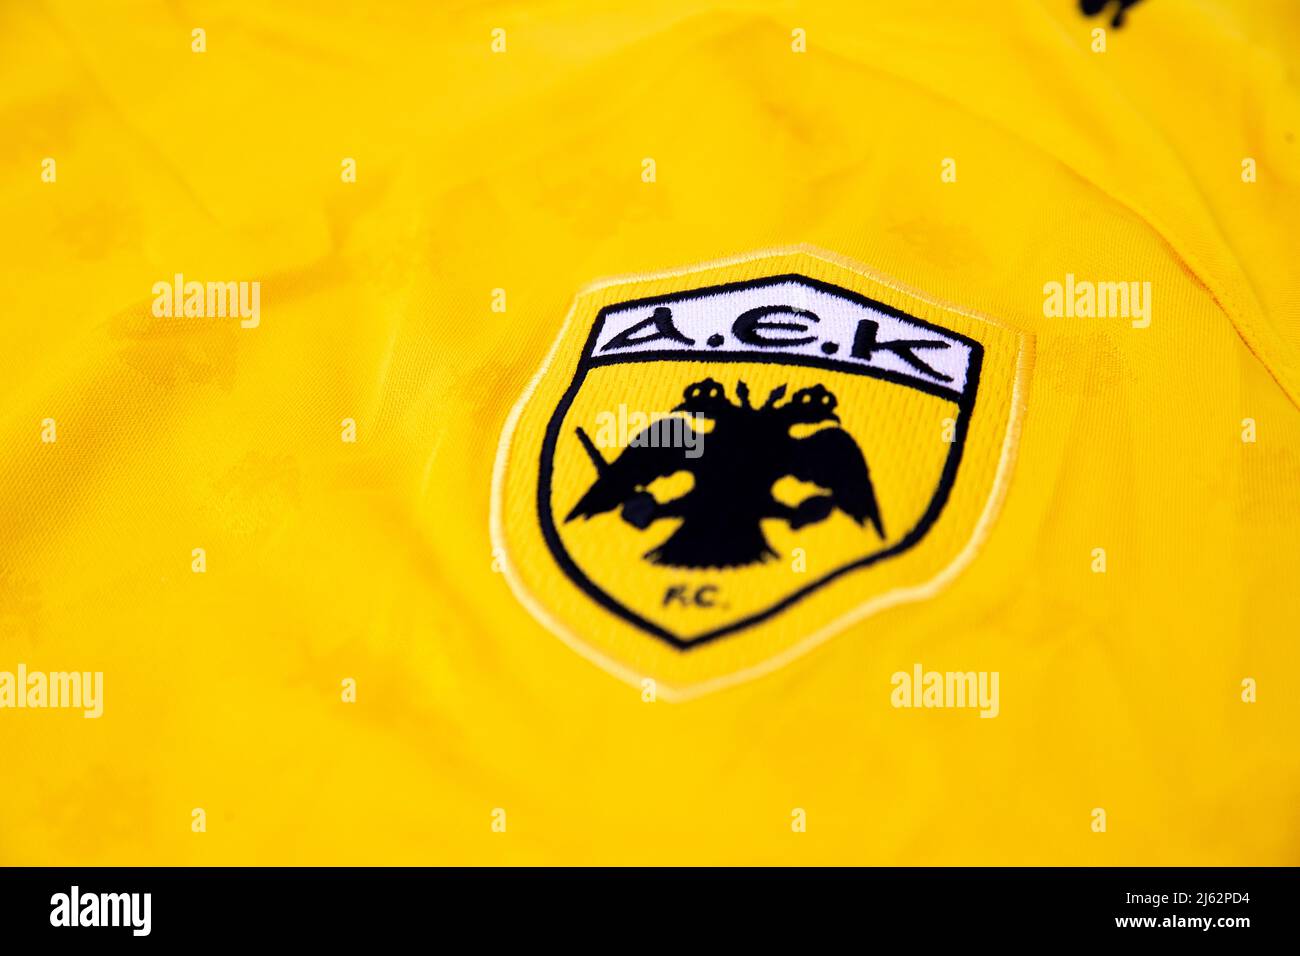 AEK Athens FC badge on the front of a folded yellow puma football shirt Stock Photo